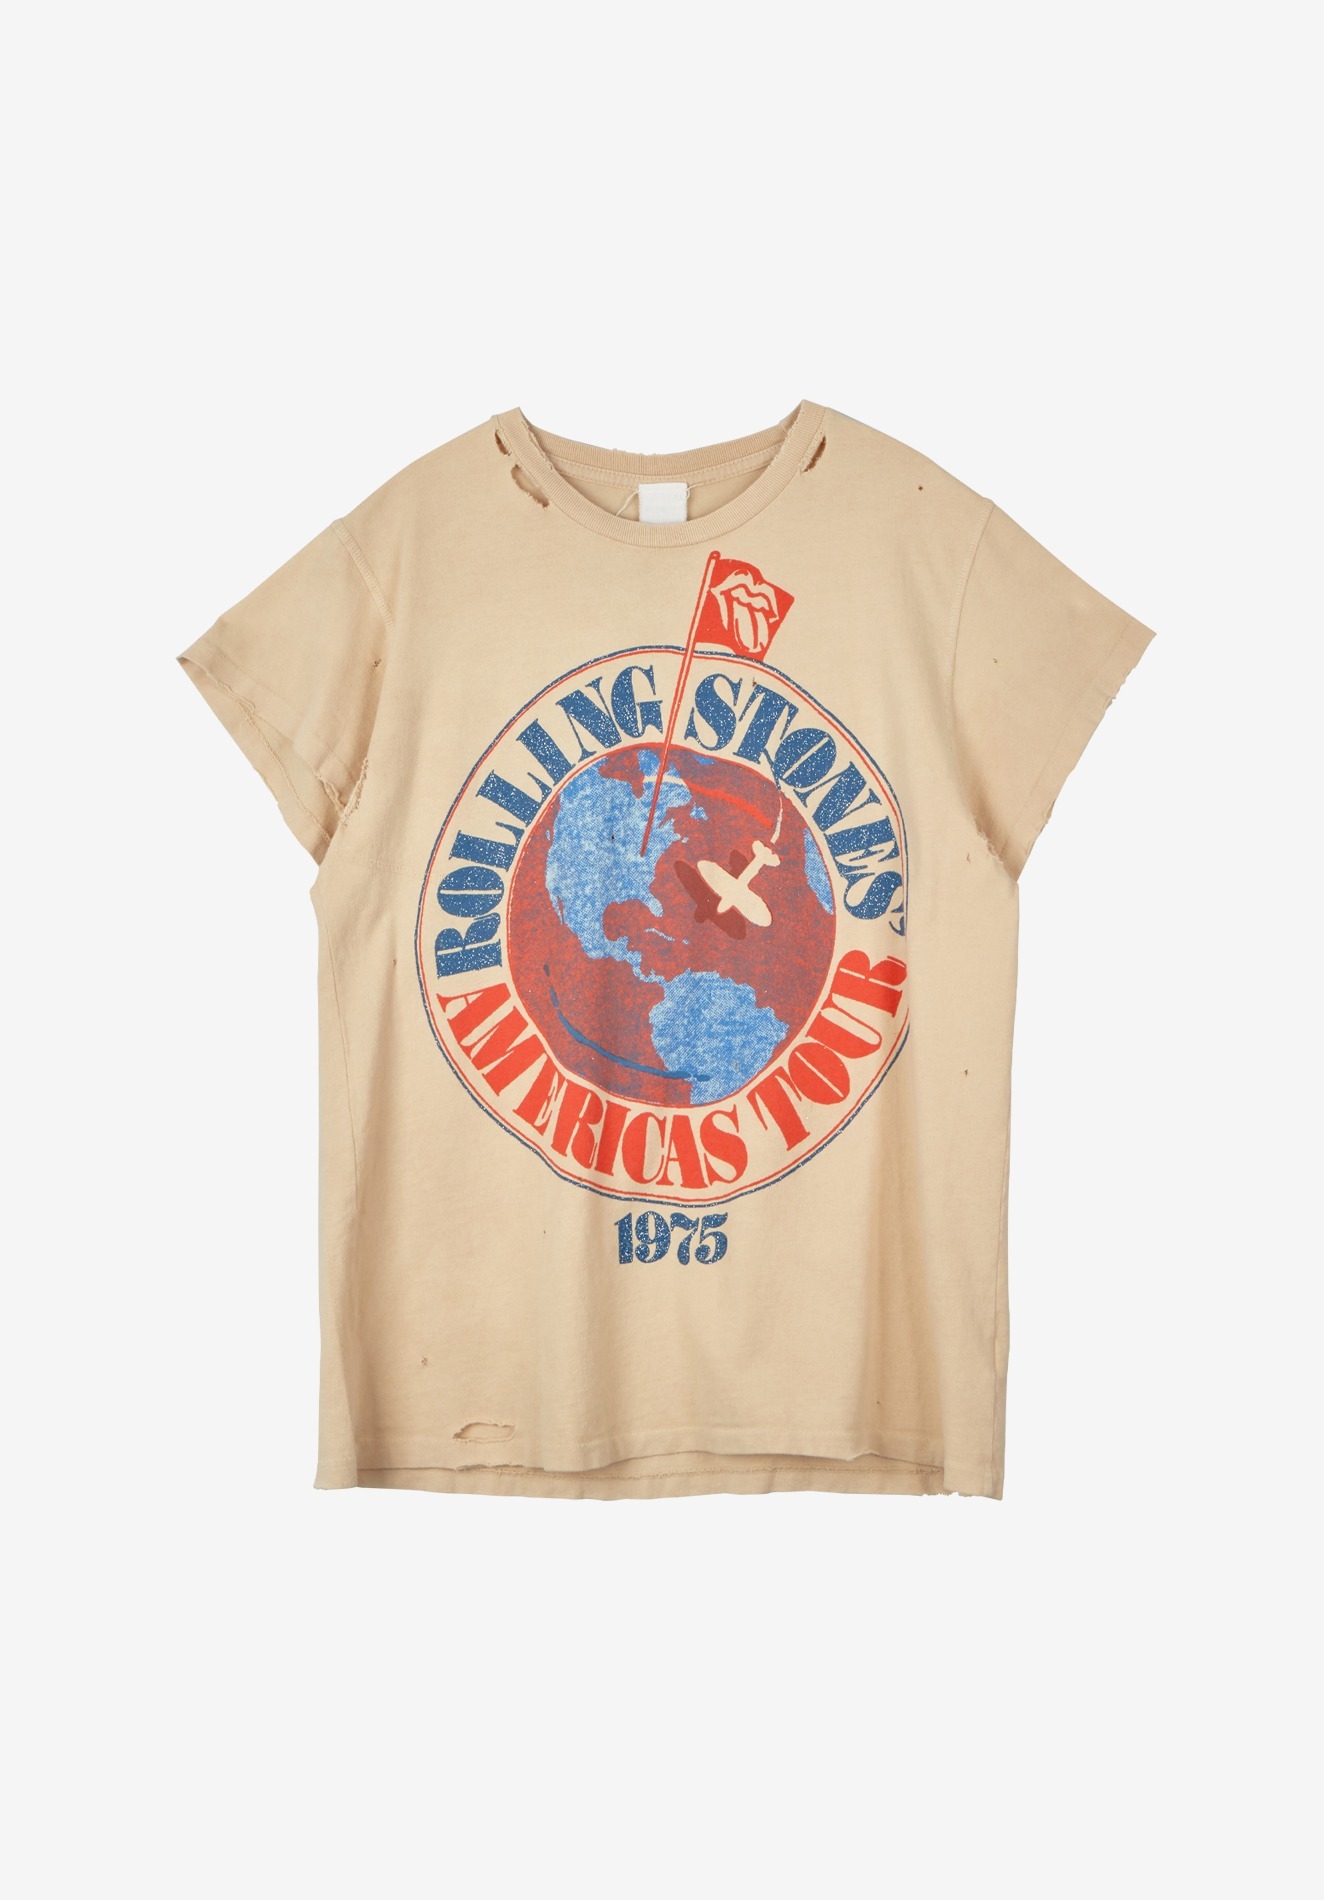 THE ROLLING STONES DESTROYED UNISEX TEE, SUNBLEACH